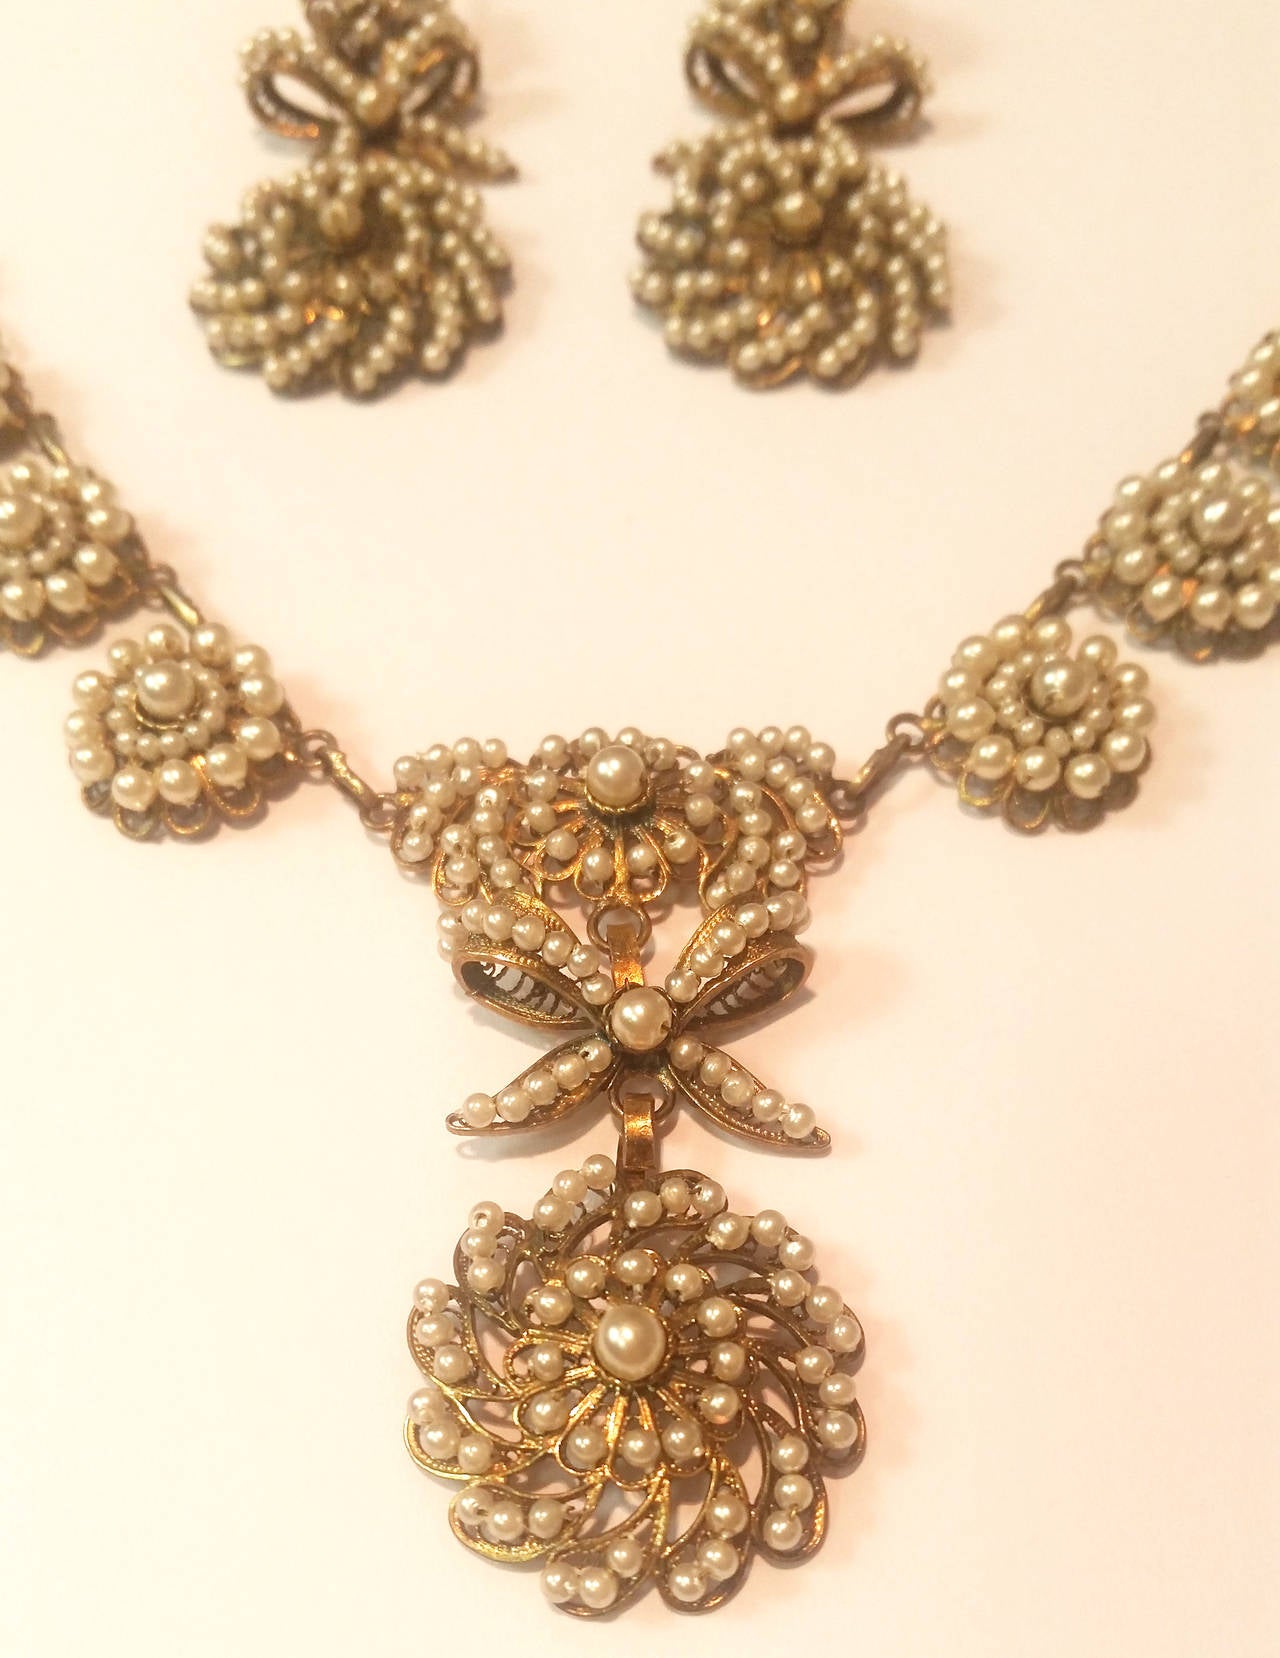 Amazing 19th Century golden filigree suite with rosettes and bows made of little pearls.

Necklace. 30.05 grams. Length 42cm. Height 5cm
Earrings. 9.05 grams. Length 6cm. Width 2 centimeters.